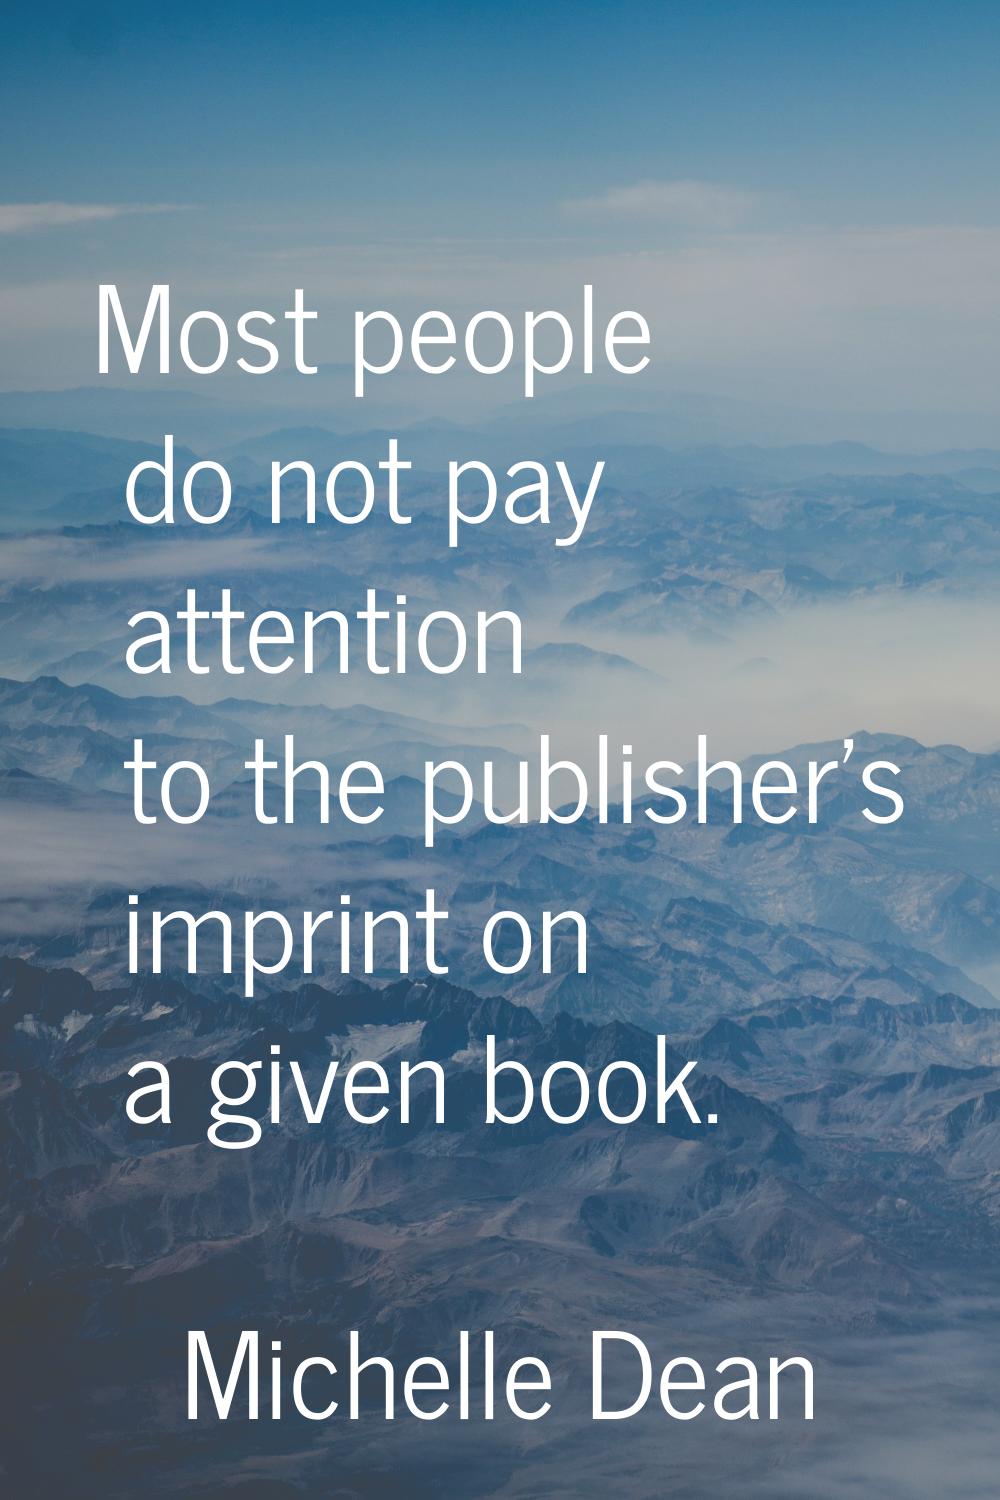 Most people do not pay attention to the publisher's imprint on a given book.